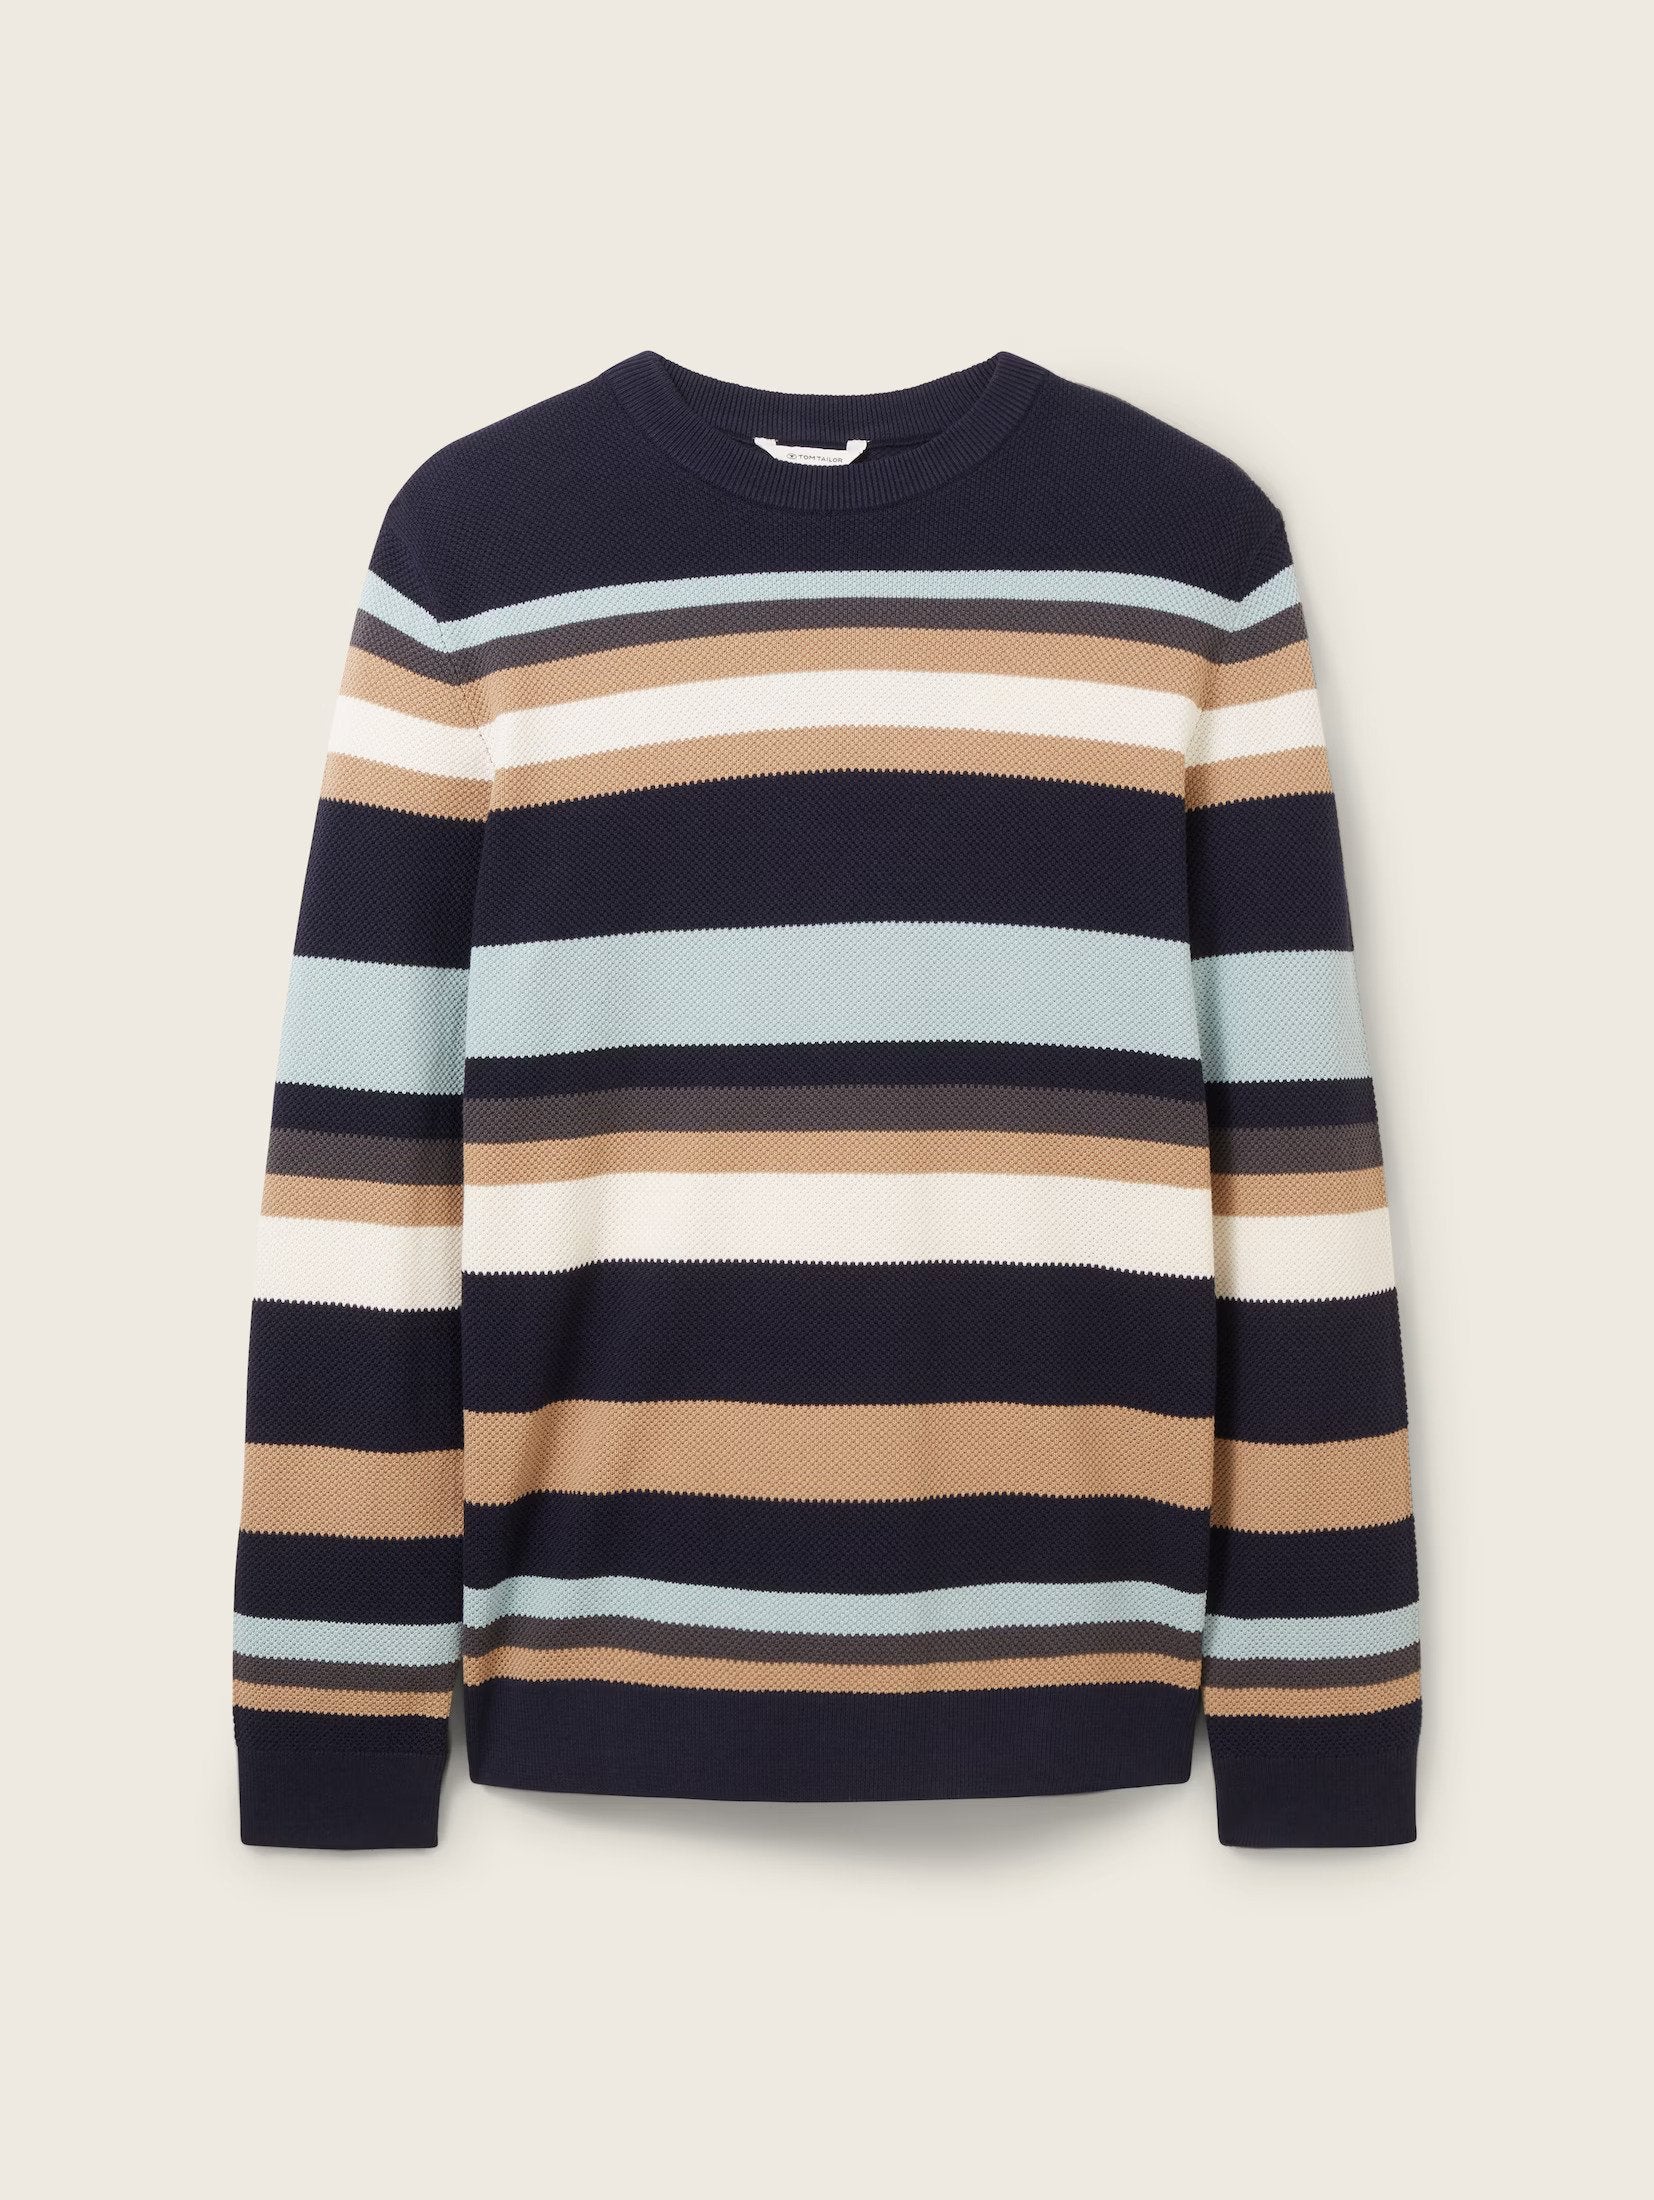 Tom Tailor Navy Stripped Knitted Sweater